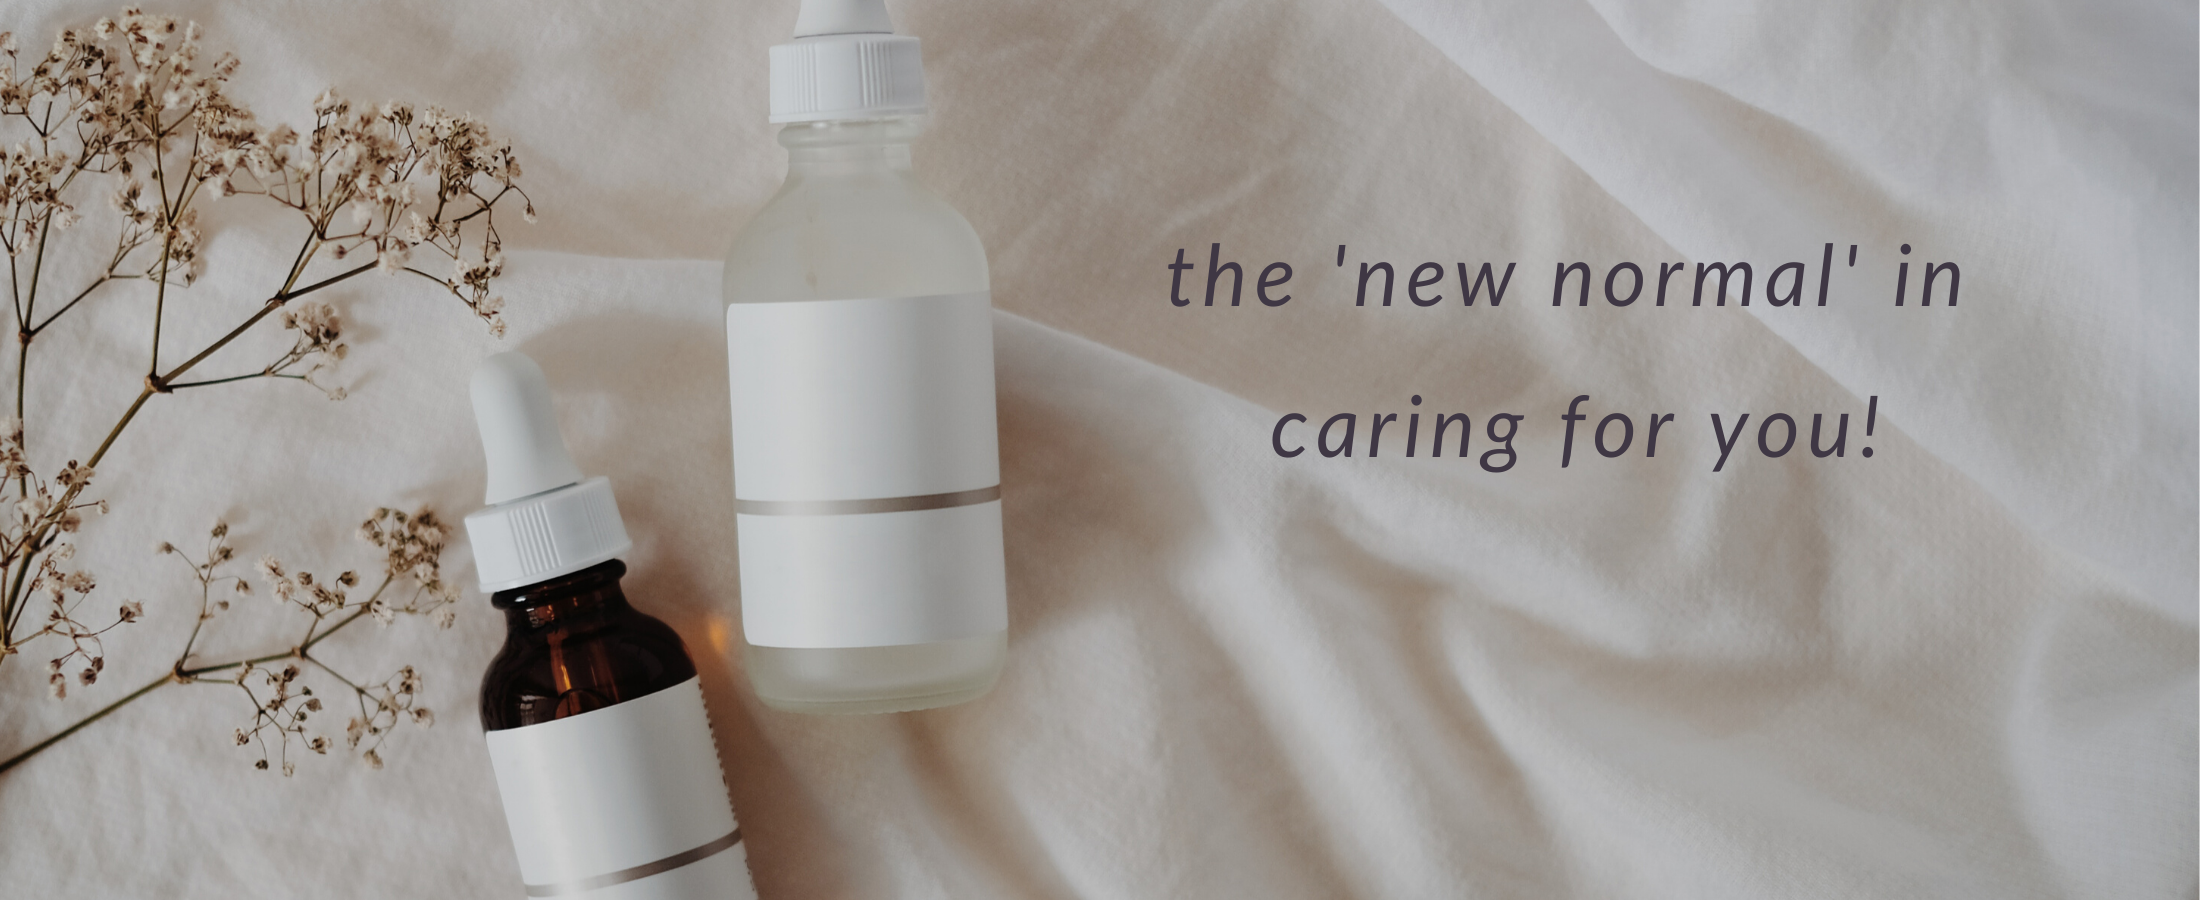 the new normal in caring for you touch to heal spa